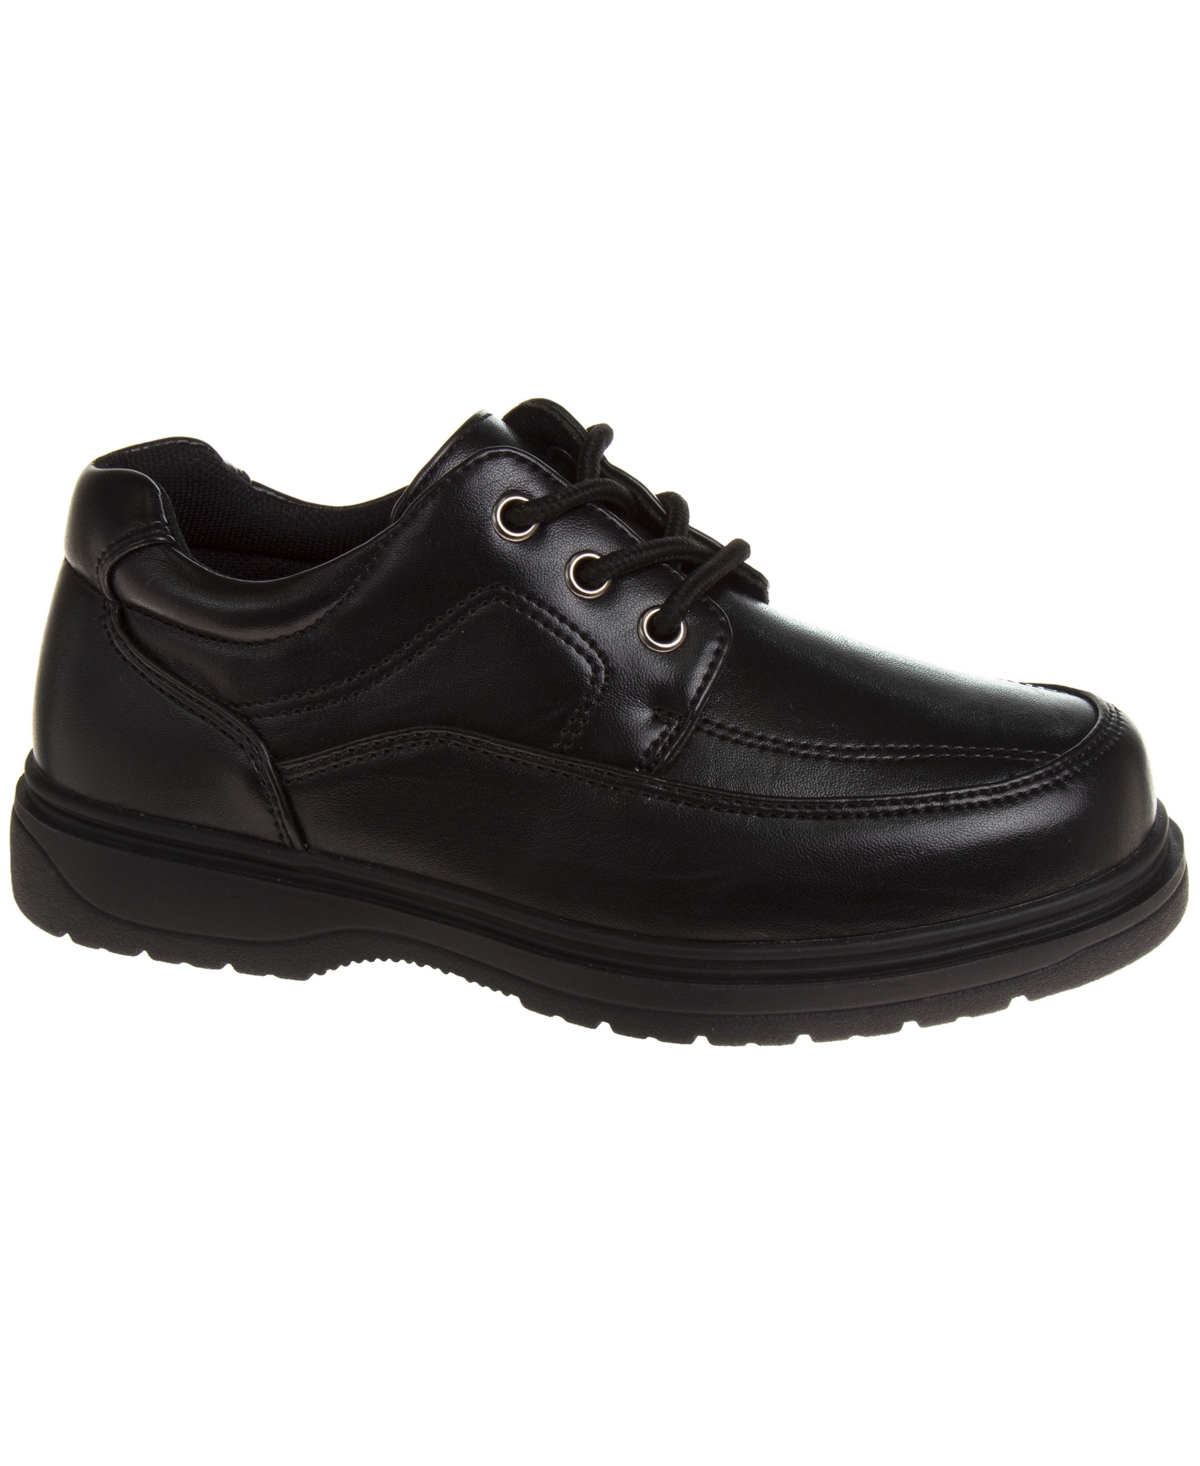 FRENCH TOAST BIG BOYS SCHOOL LACE UP SHOES